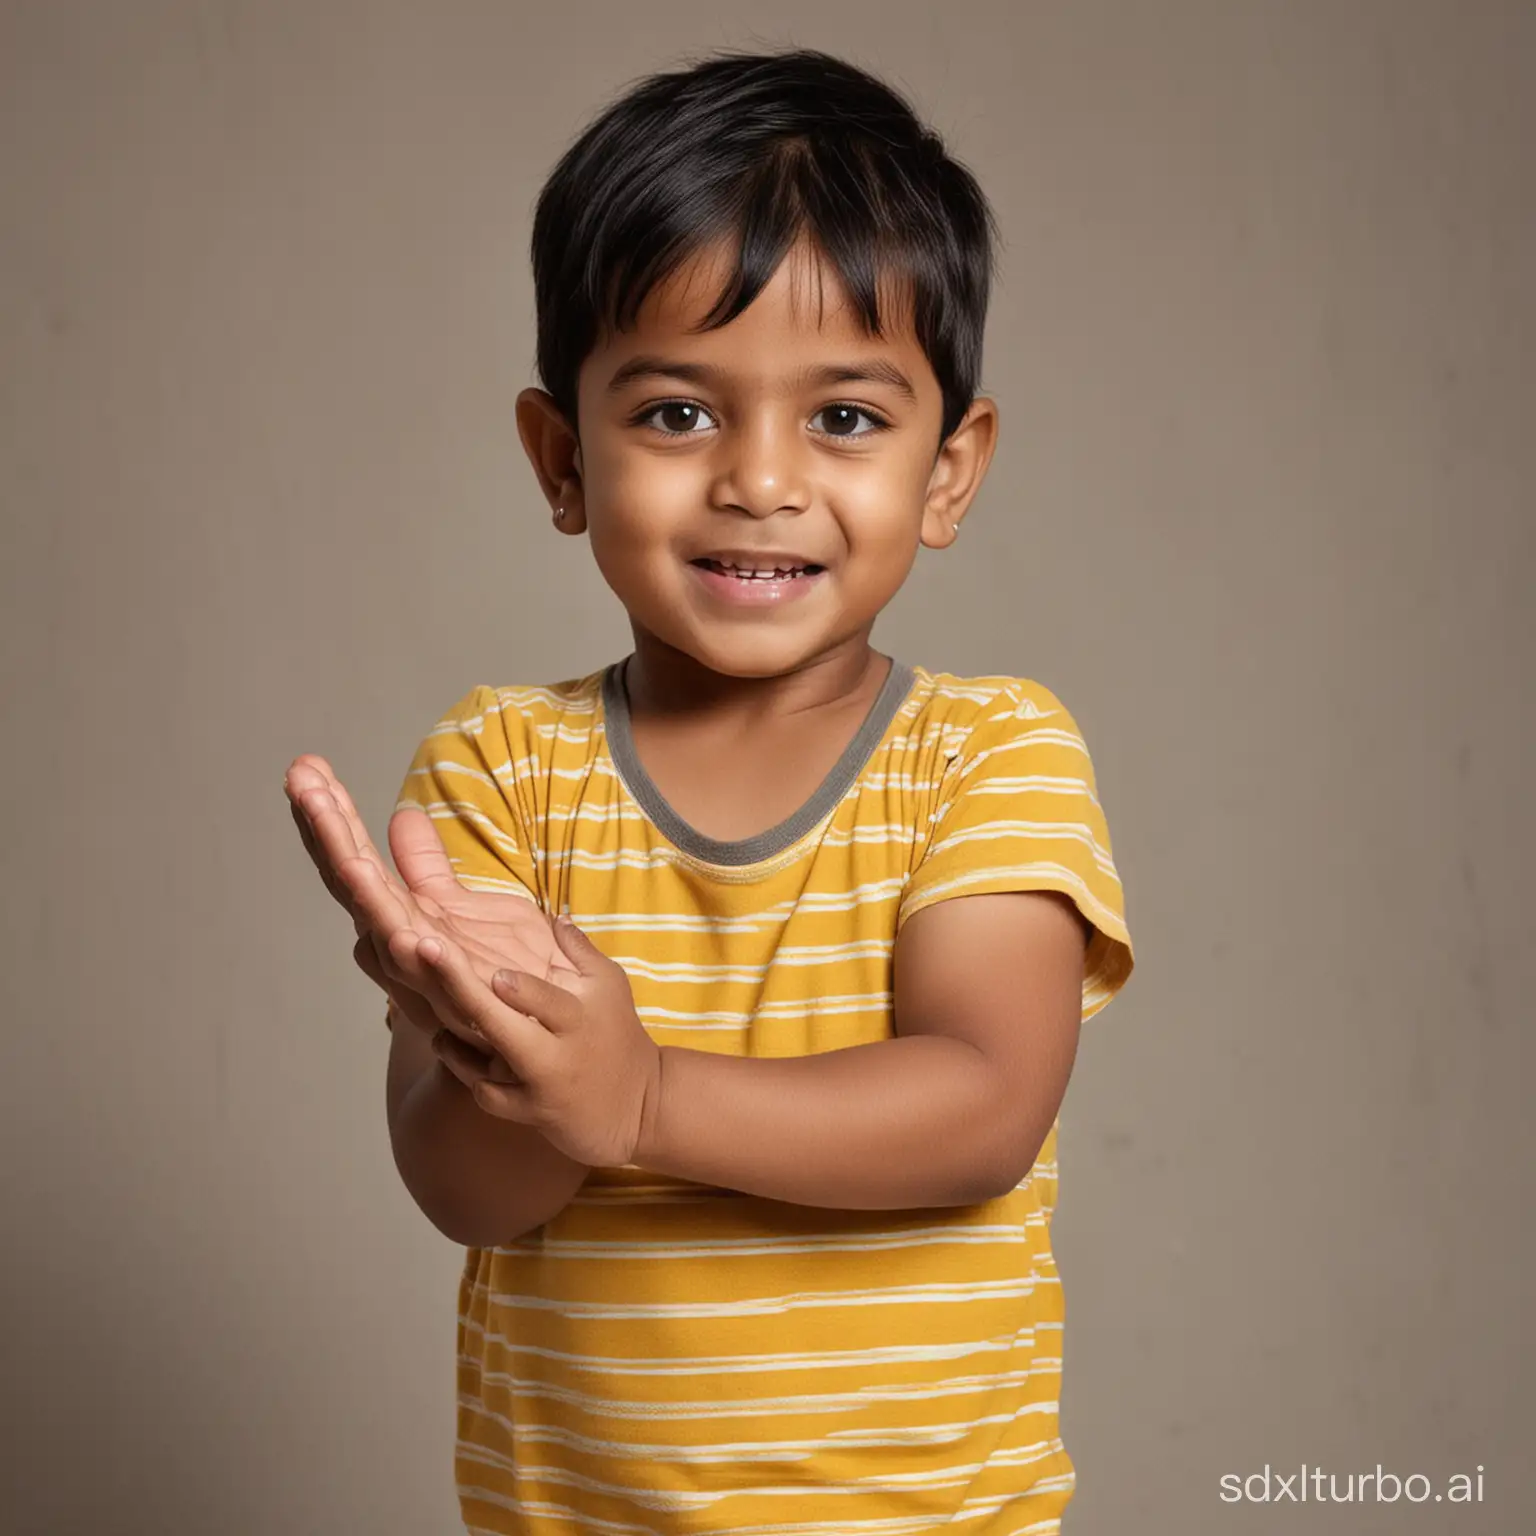 Energetic-4YearOld-Indian-Boy-Playfully-Punching-Hands